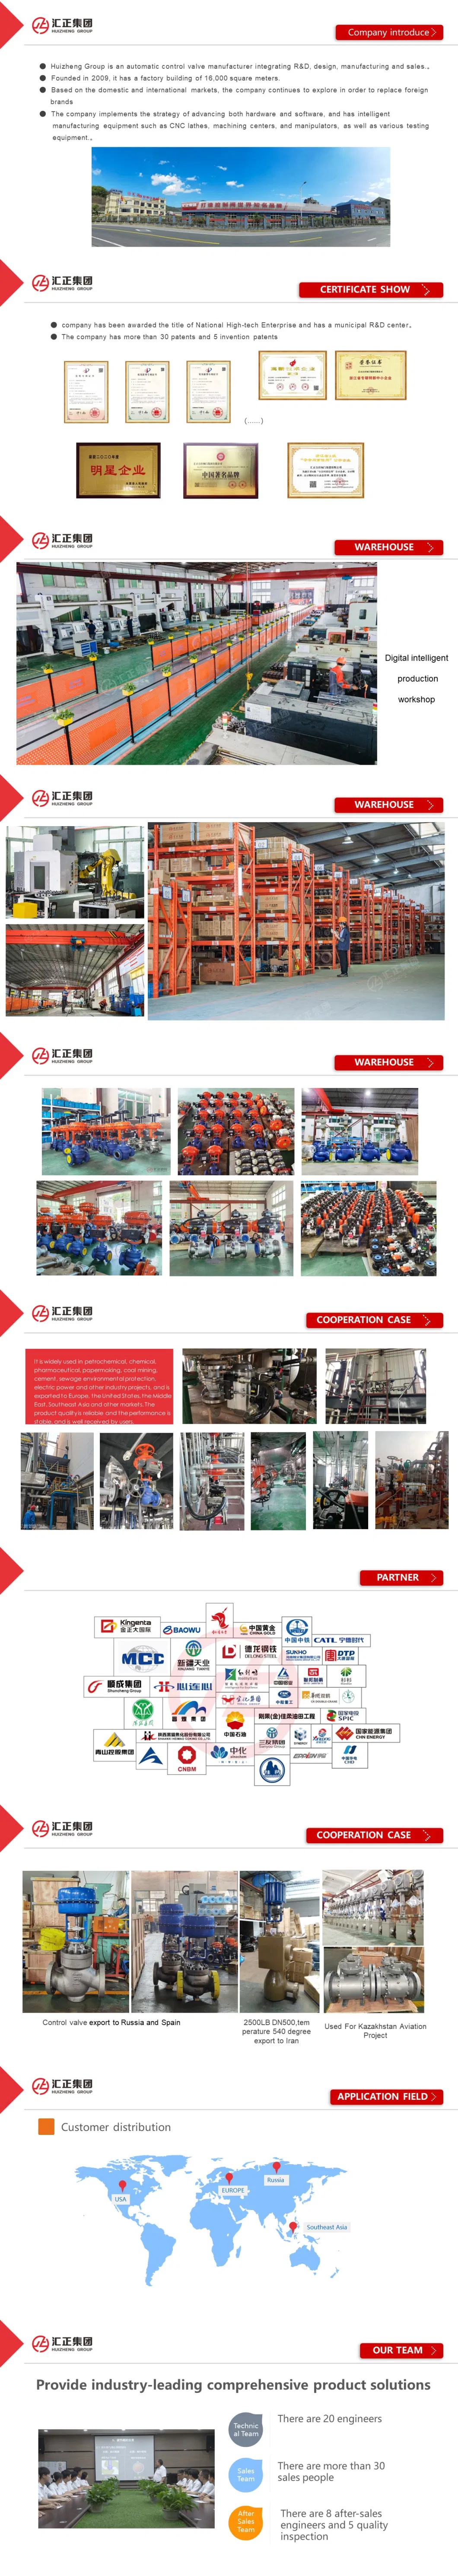 Cage Guide Multi Stage Pressure Drop Forged Pneumatic Control Valve/CE Certification Regulated Valve/Top Guide Control Valve/Handwheel Control Valve